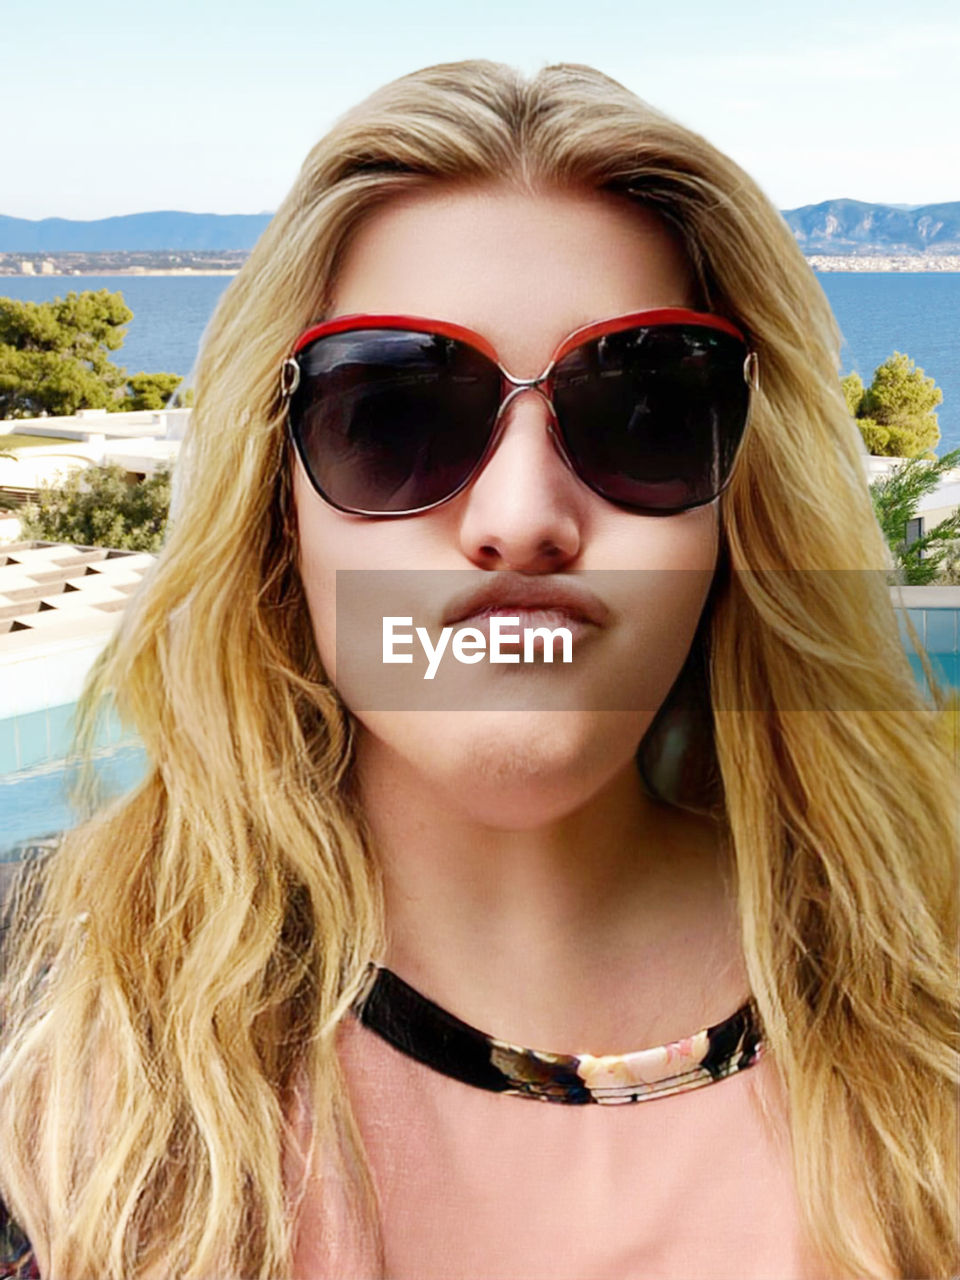 fashion, sunglasses, glasses, portrait, blond hair, human hair, long hair, hairstyle, one person, young adult, women, adult, front view, headshot, vision care, eyewear, fashion accessory, summer, brown hair, day, nature, beach, leisure activity, lifestyles, water, land, outdoors, looking at camera, human face, sky, clothing, sunlight, goggles, trip, close-up, holiday, vacation, sea, person, cool attitude